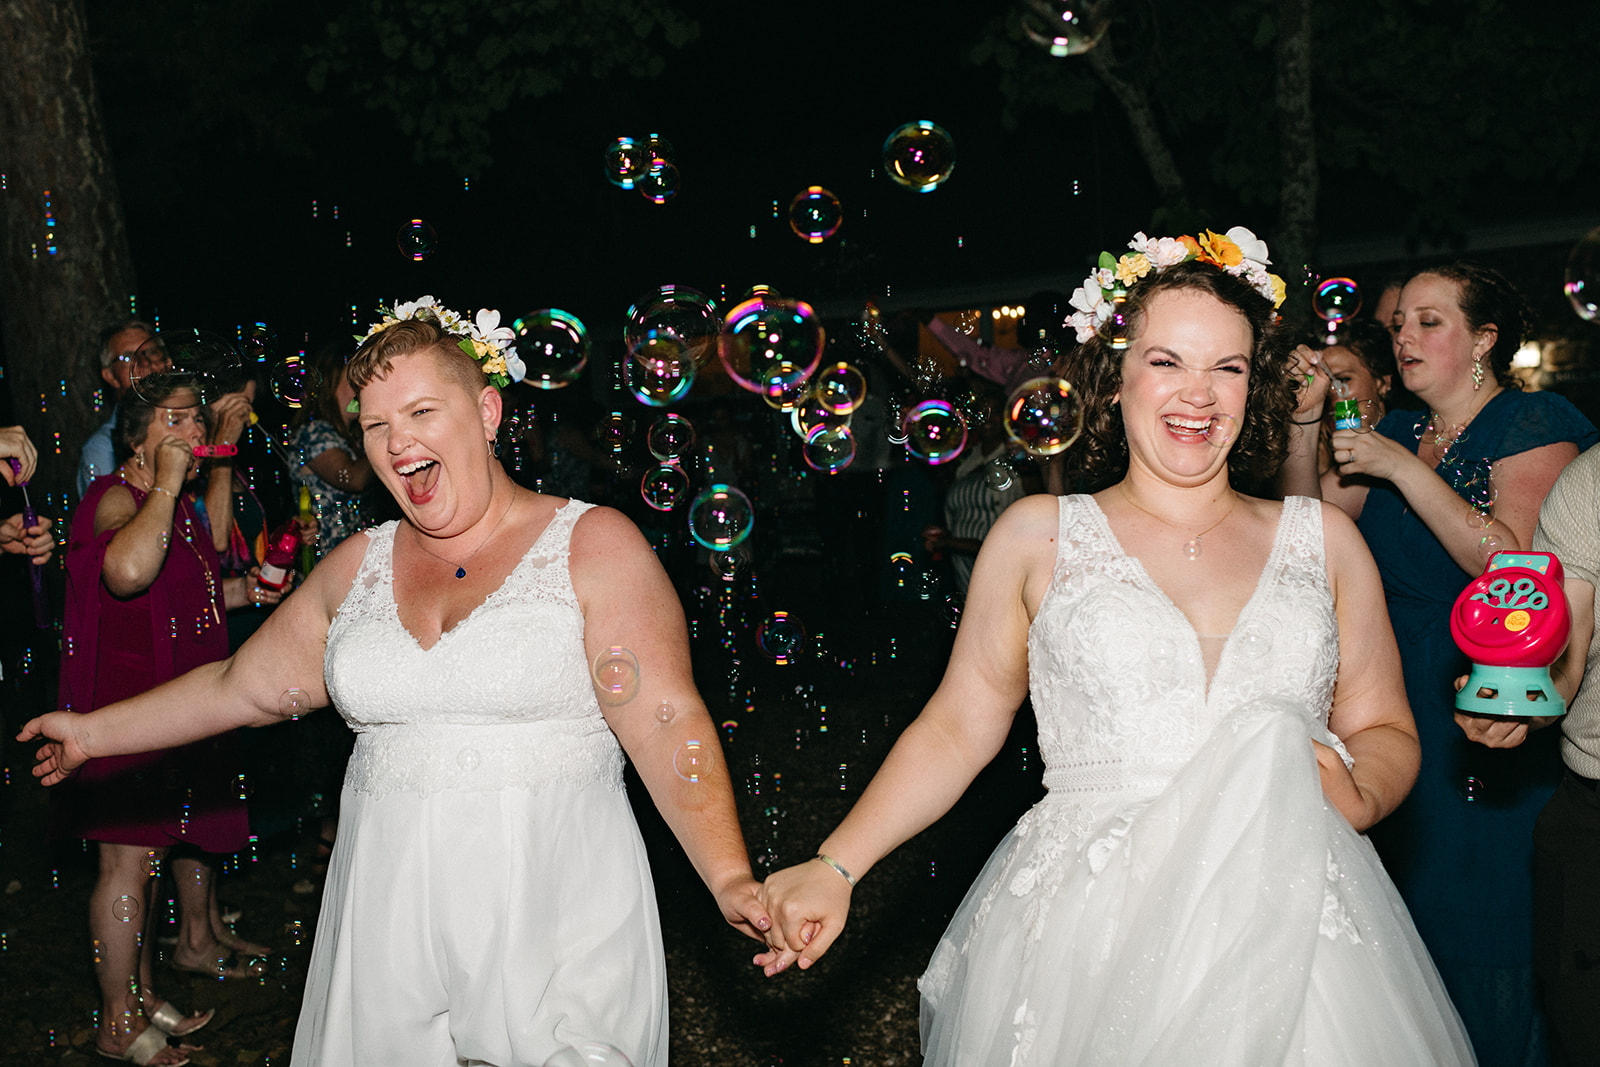 Colorful Episcopal and Presbyterian queer wedding at Mount Sequoyah in Fayetteville, Arkansas | Freckled Fox Photography | Published on Equally Wed, the world’s best website for planning your LGBTQ+ wedding